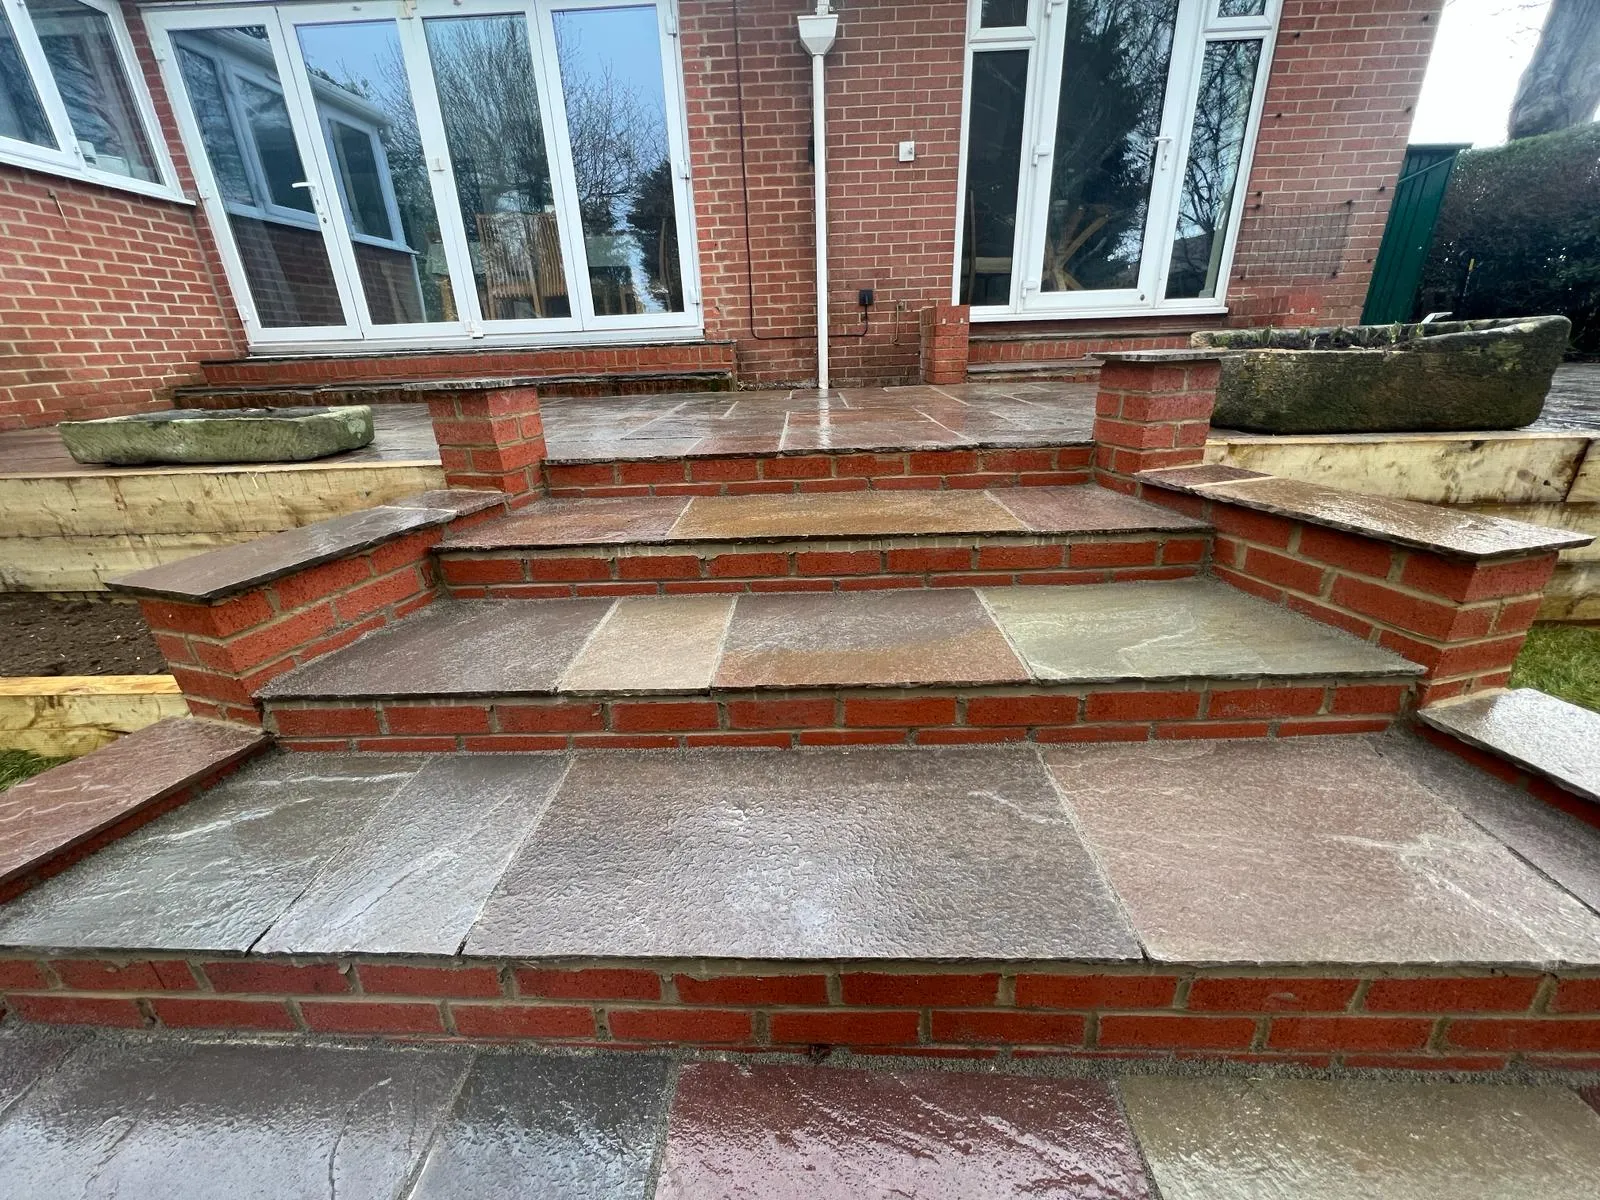 A set of stone steps leading to a brick building.